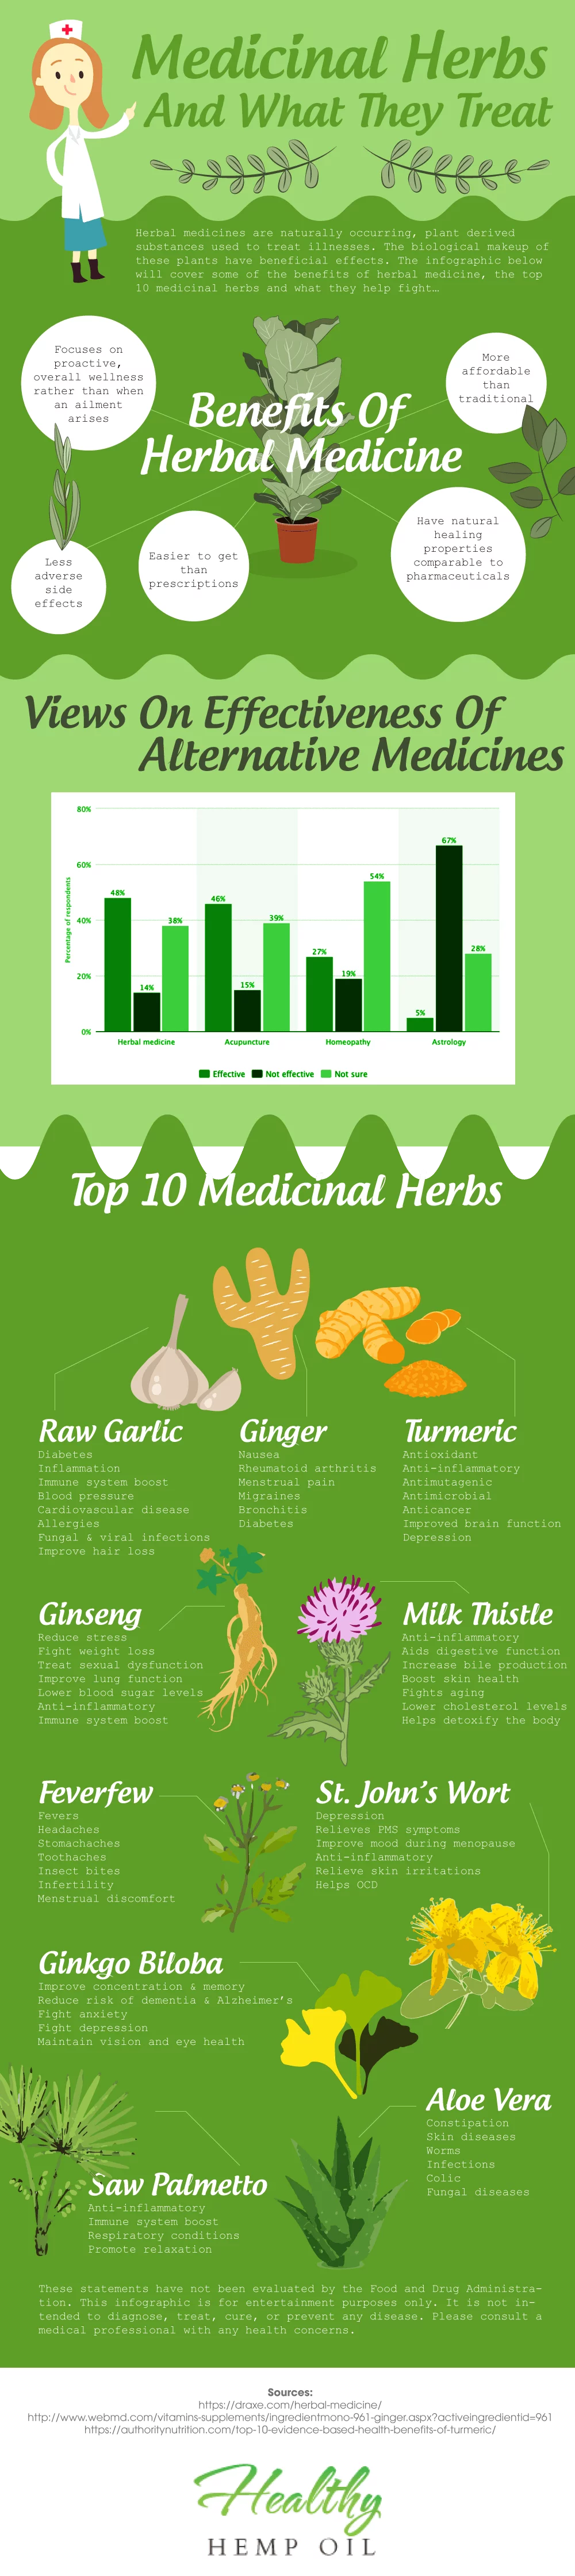 Medicinal-Herbs-And-What-They-Treat